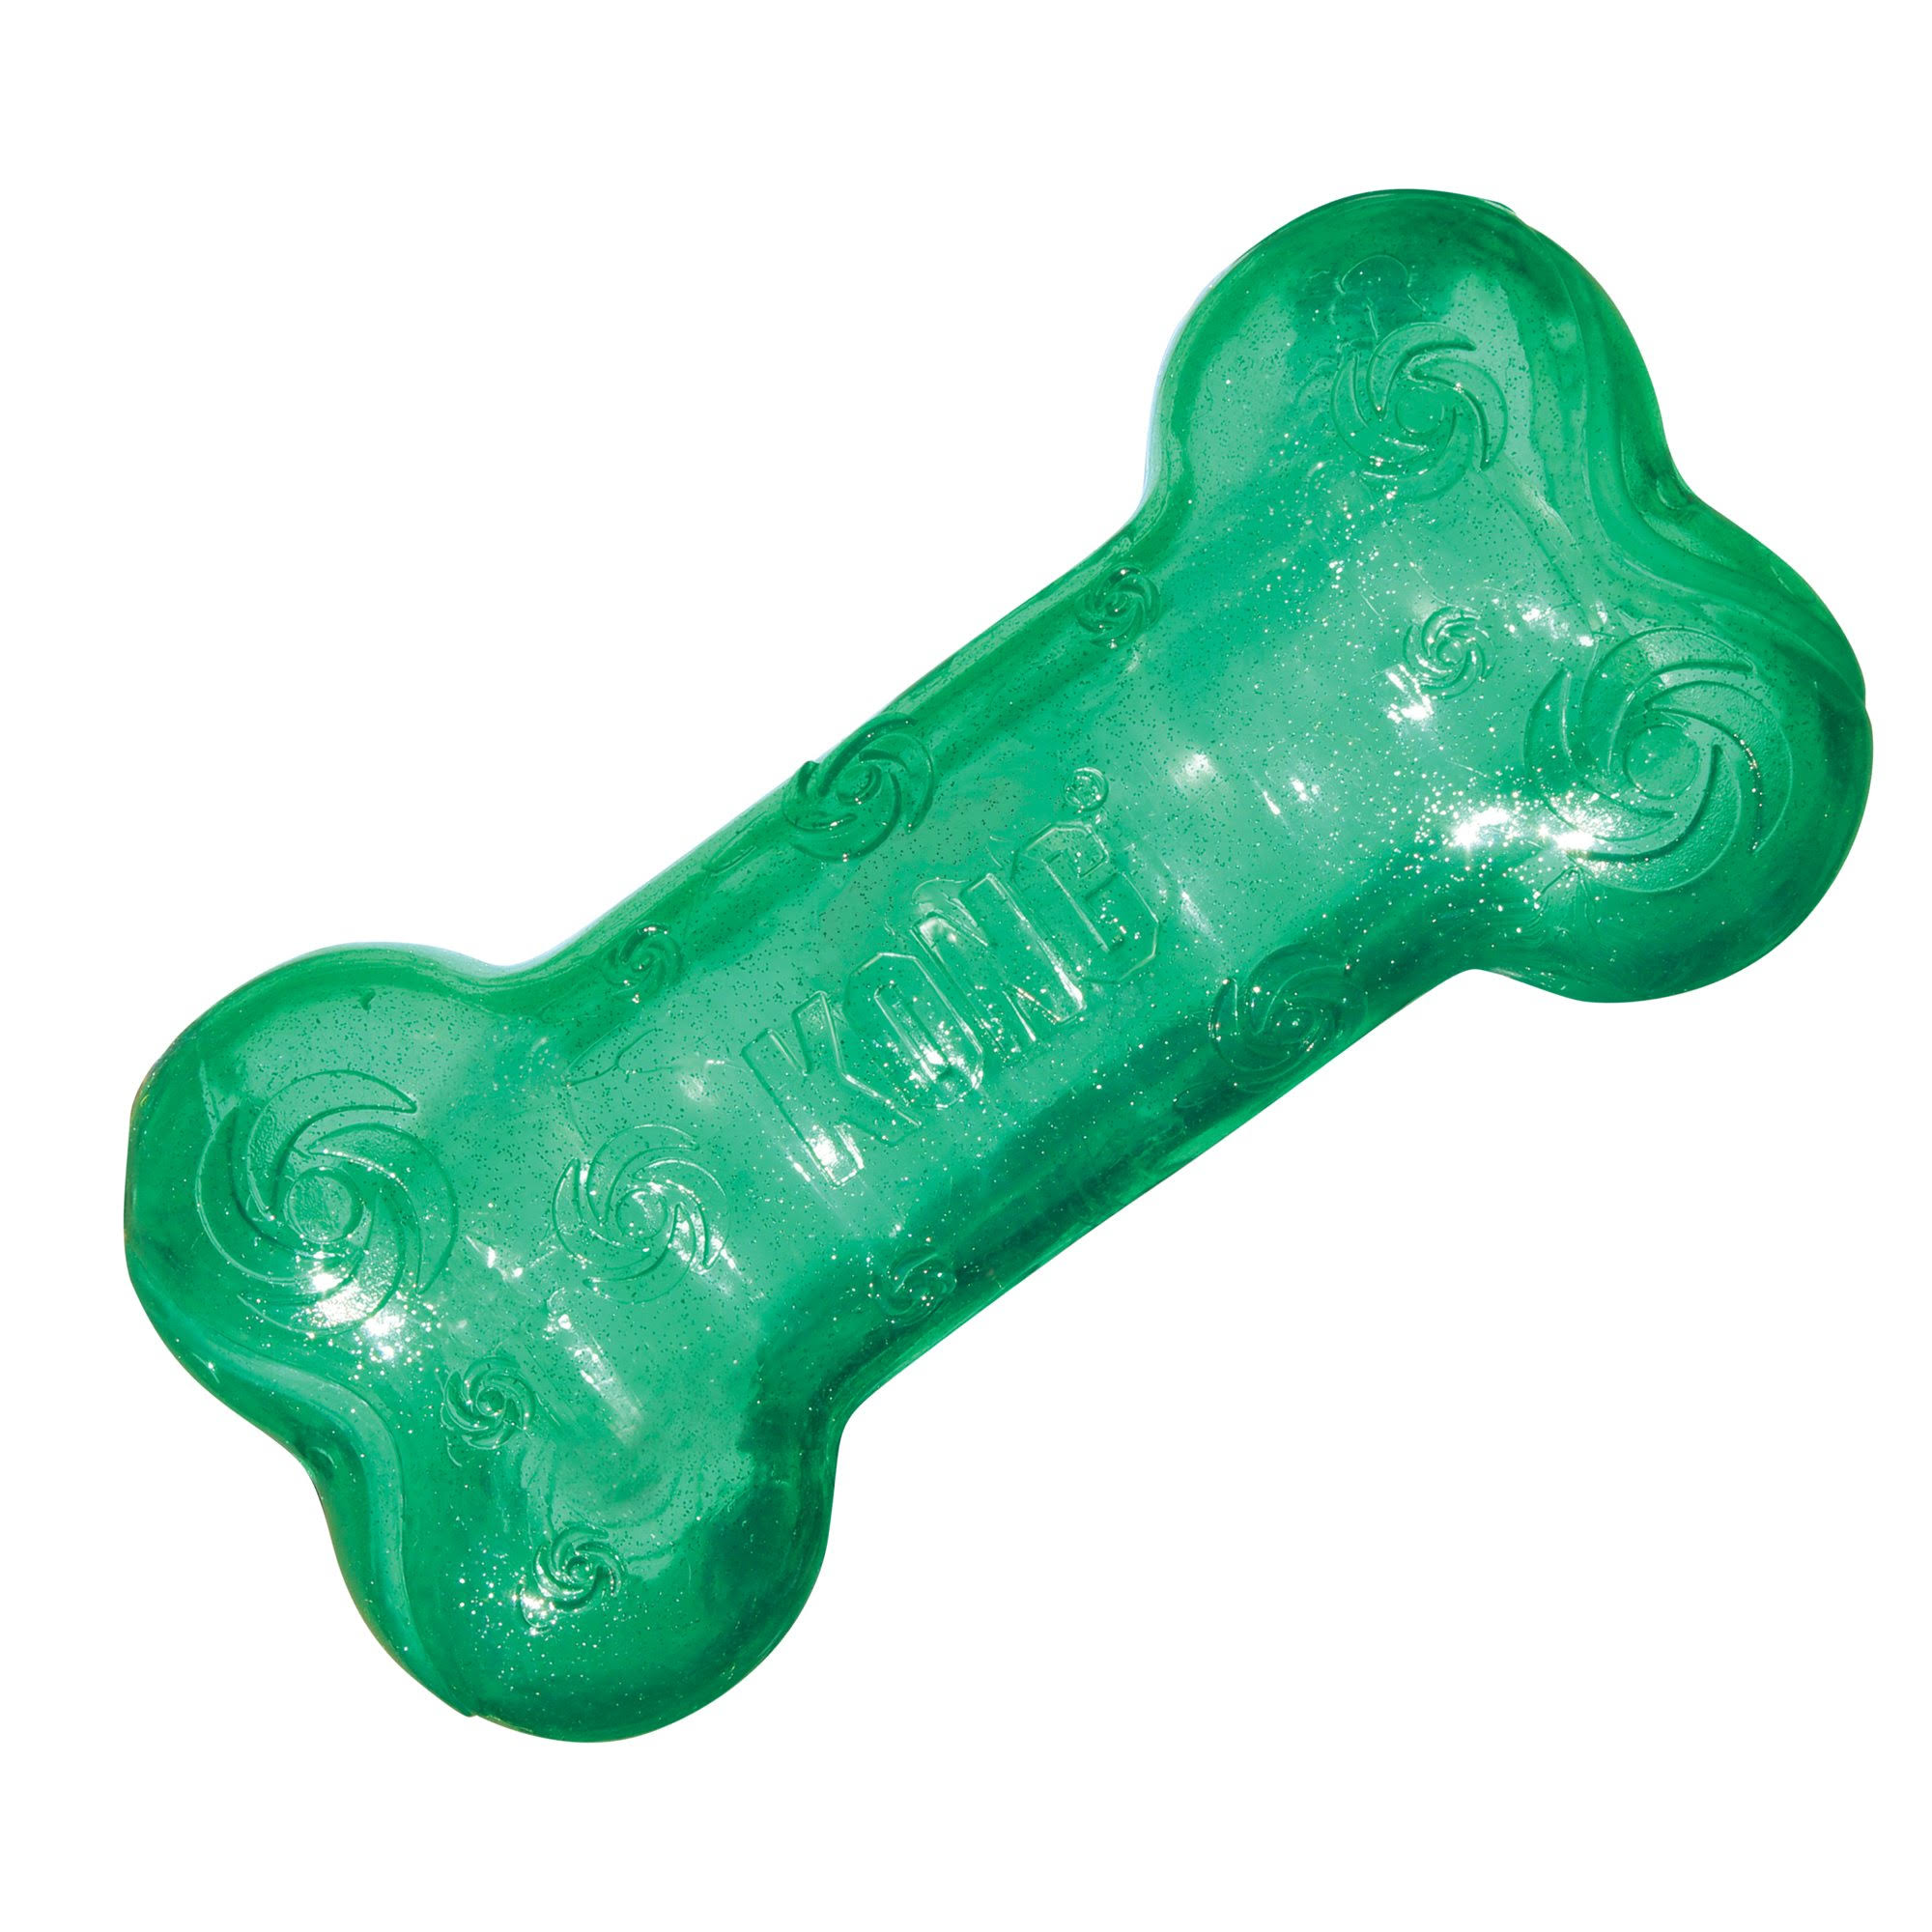 Kong Squeezz Crackle Bone - Medium, Colors May Vary